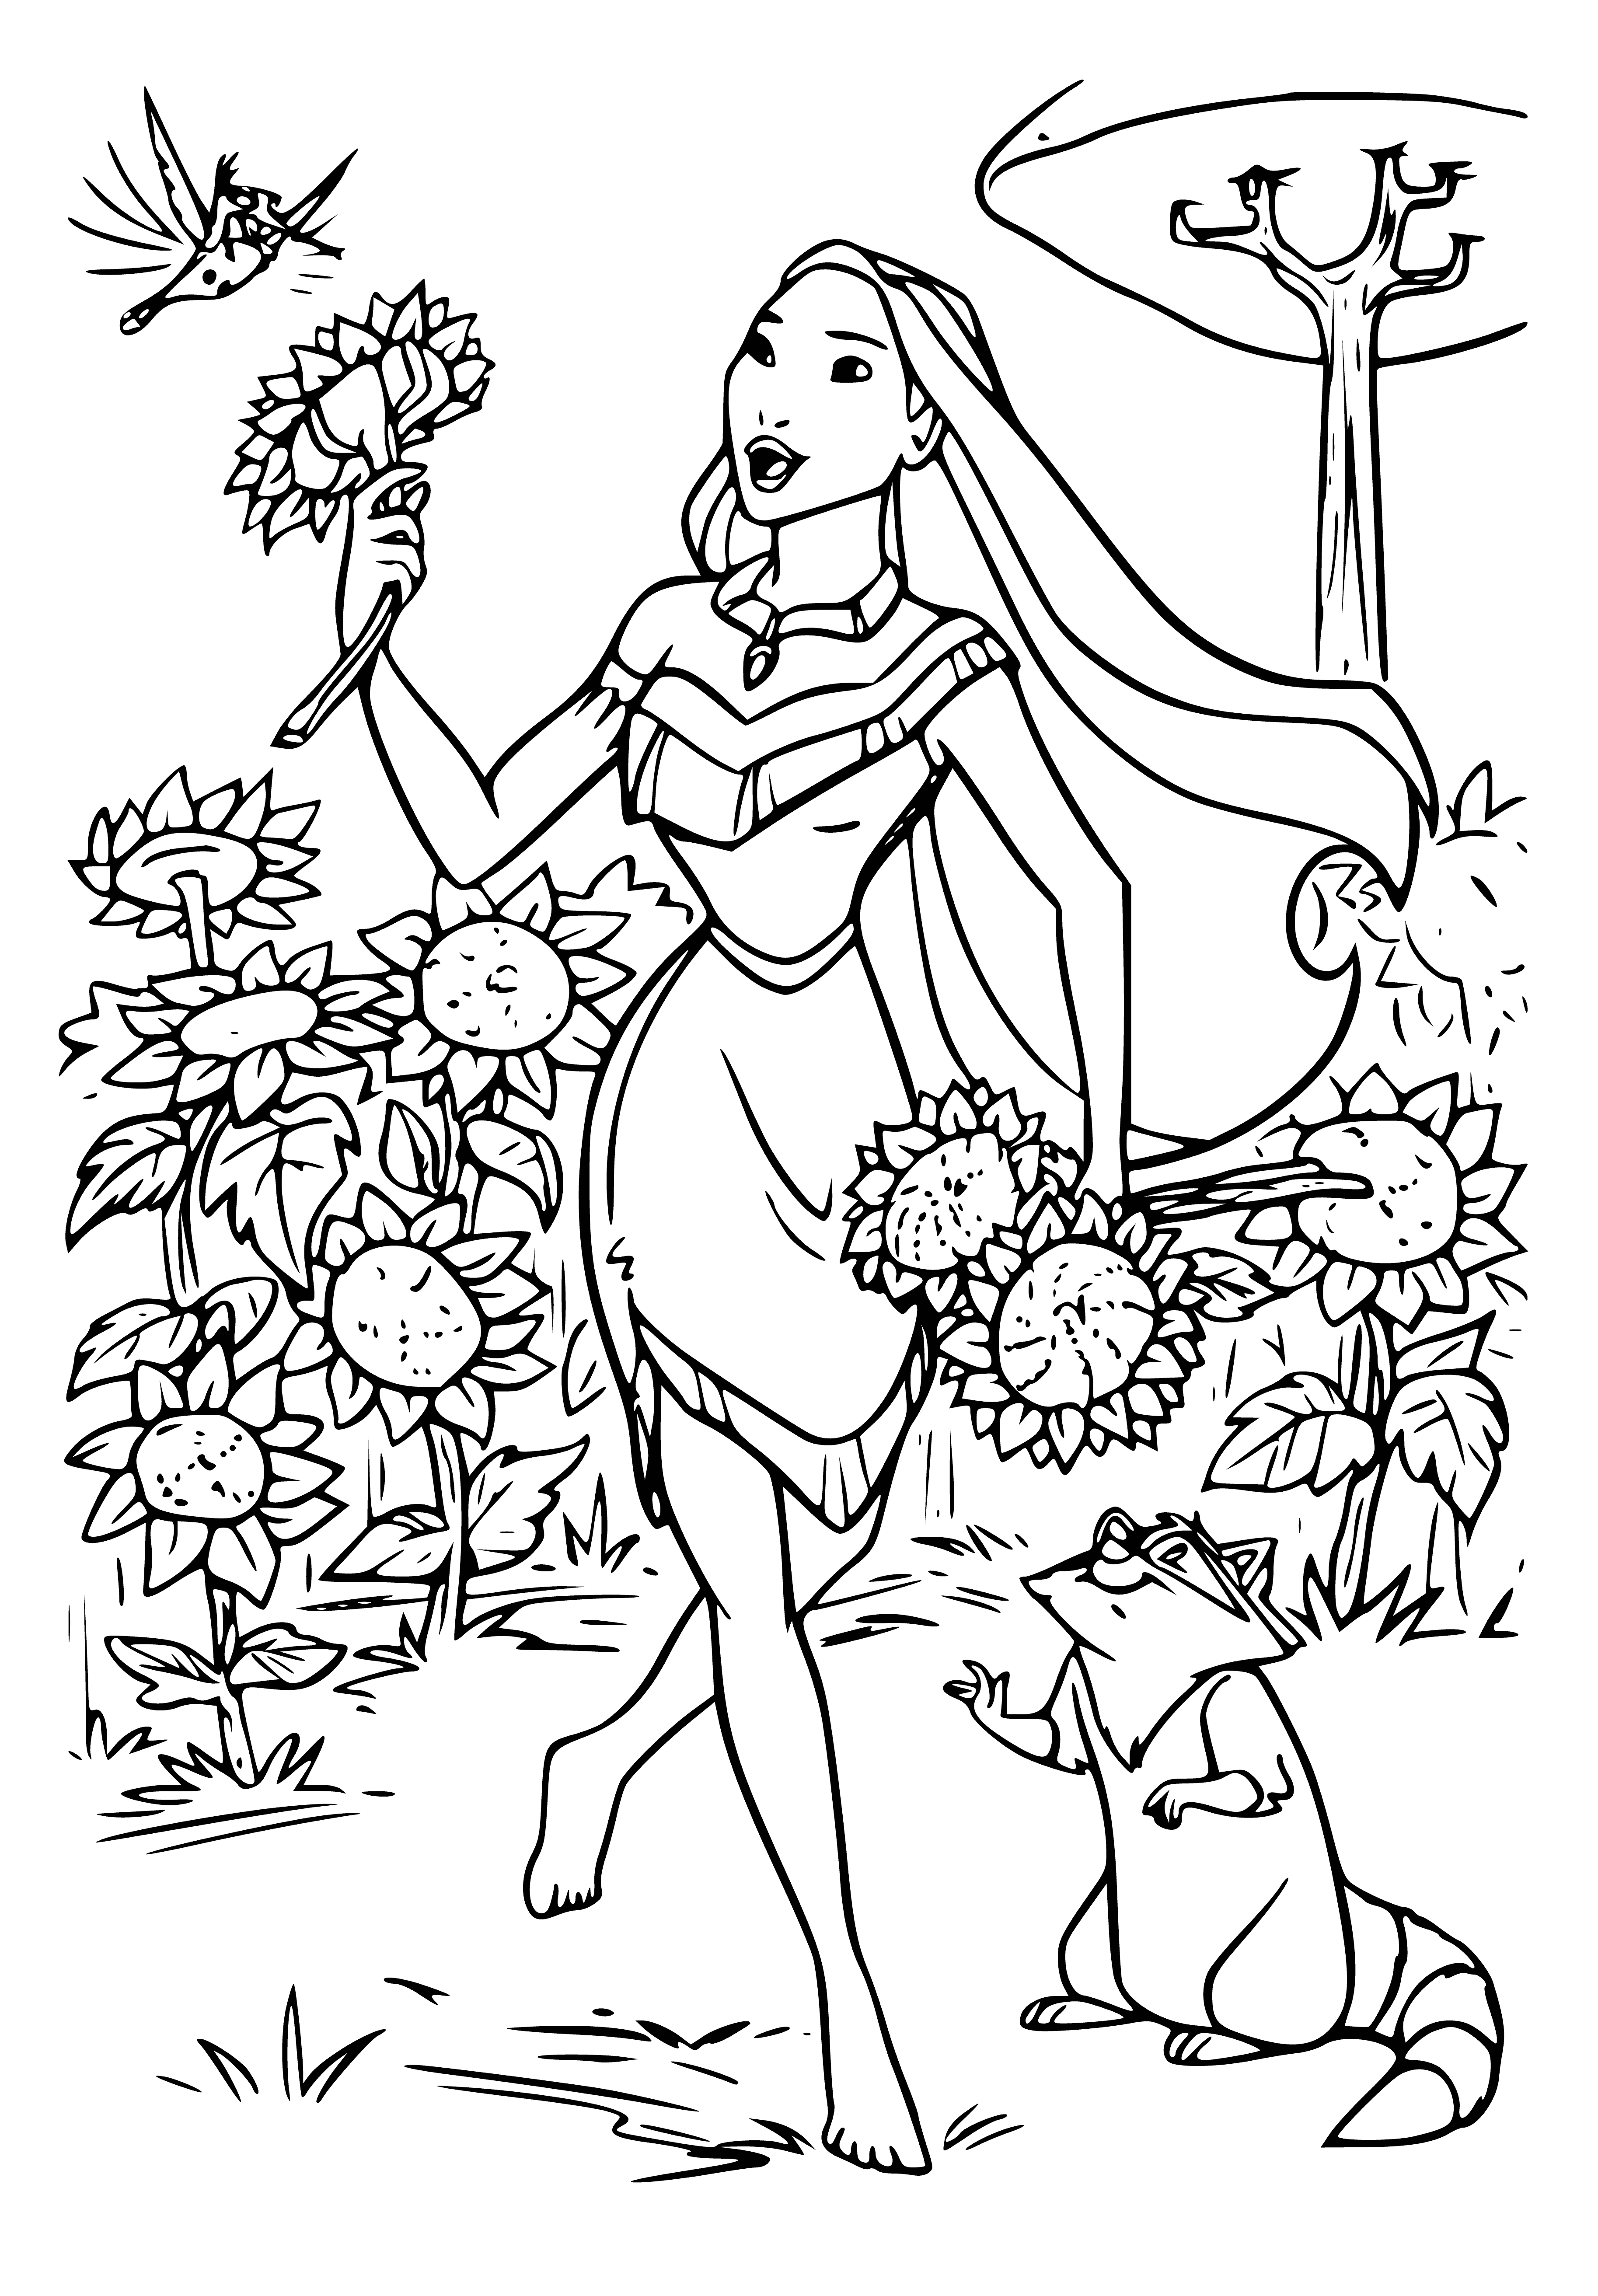 coloring page: Five women, each holding something- baby, basket, book, pen, paper.